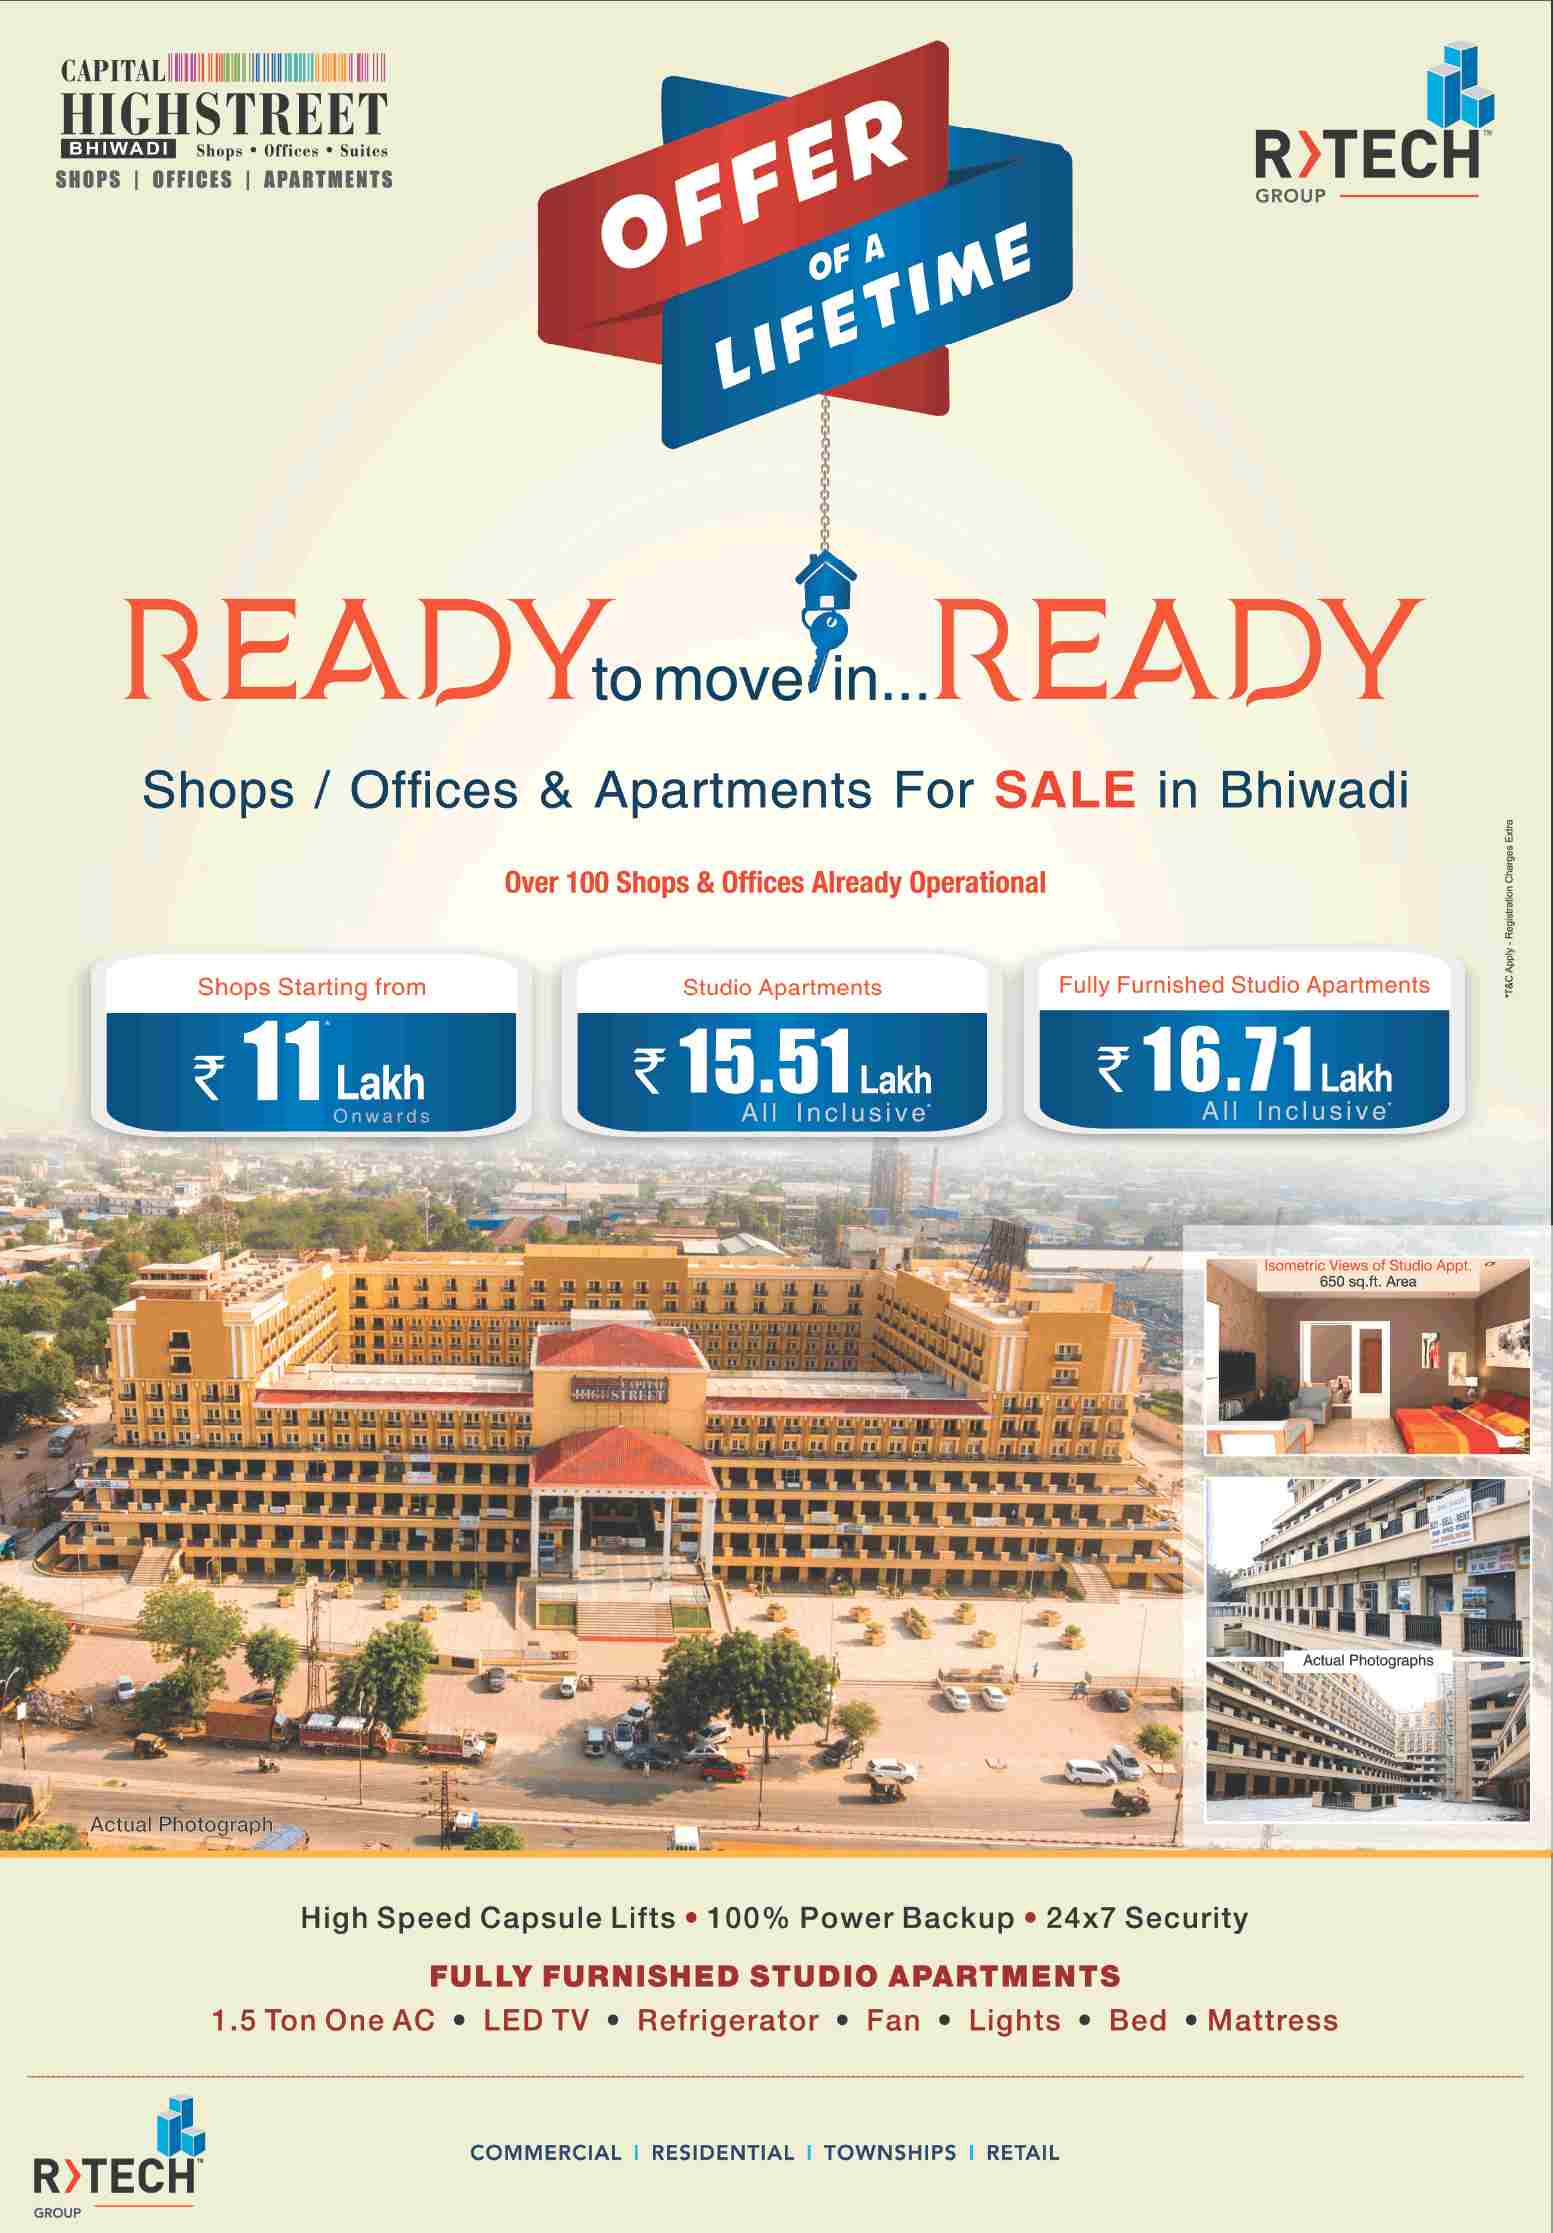 Offer of a life time with ready to move properties at R Tech Capital Highstreet in Bhiwadi Update